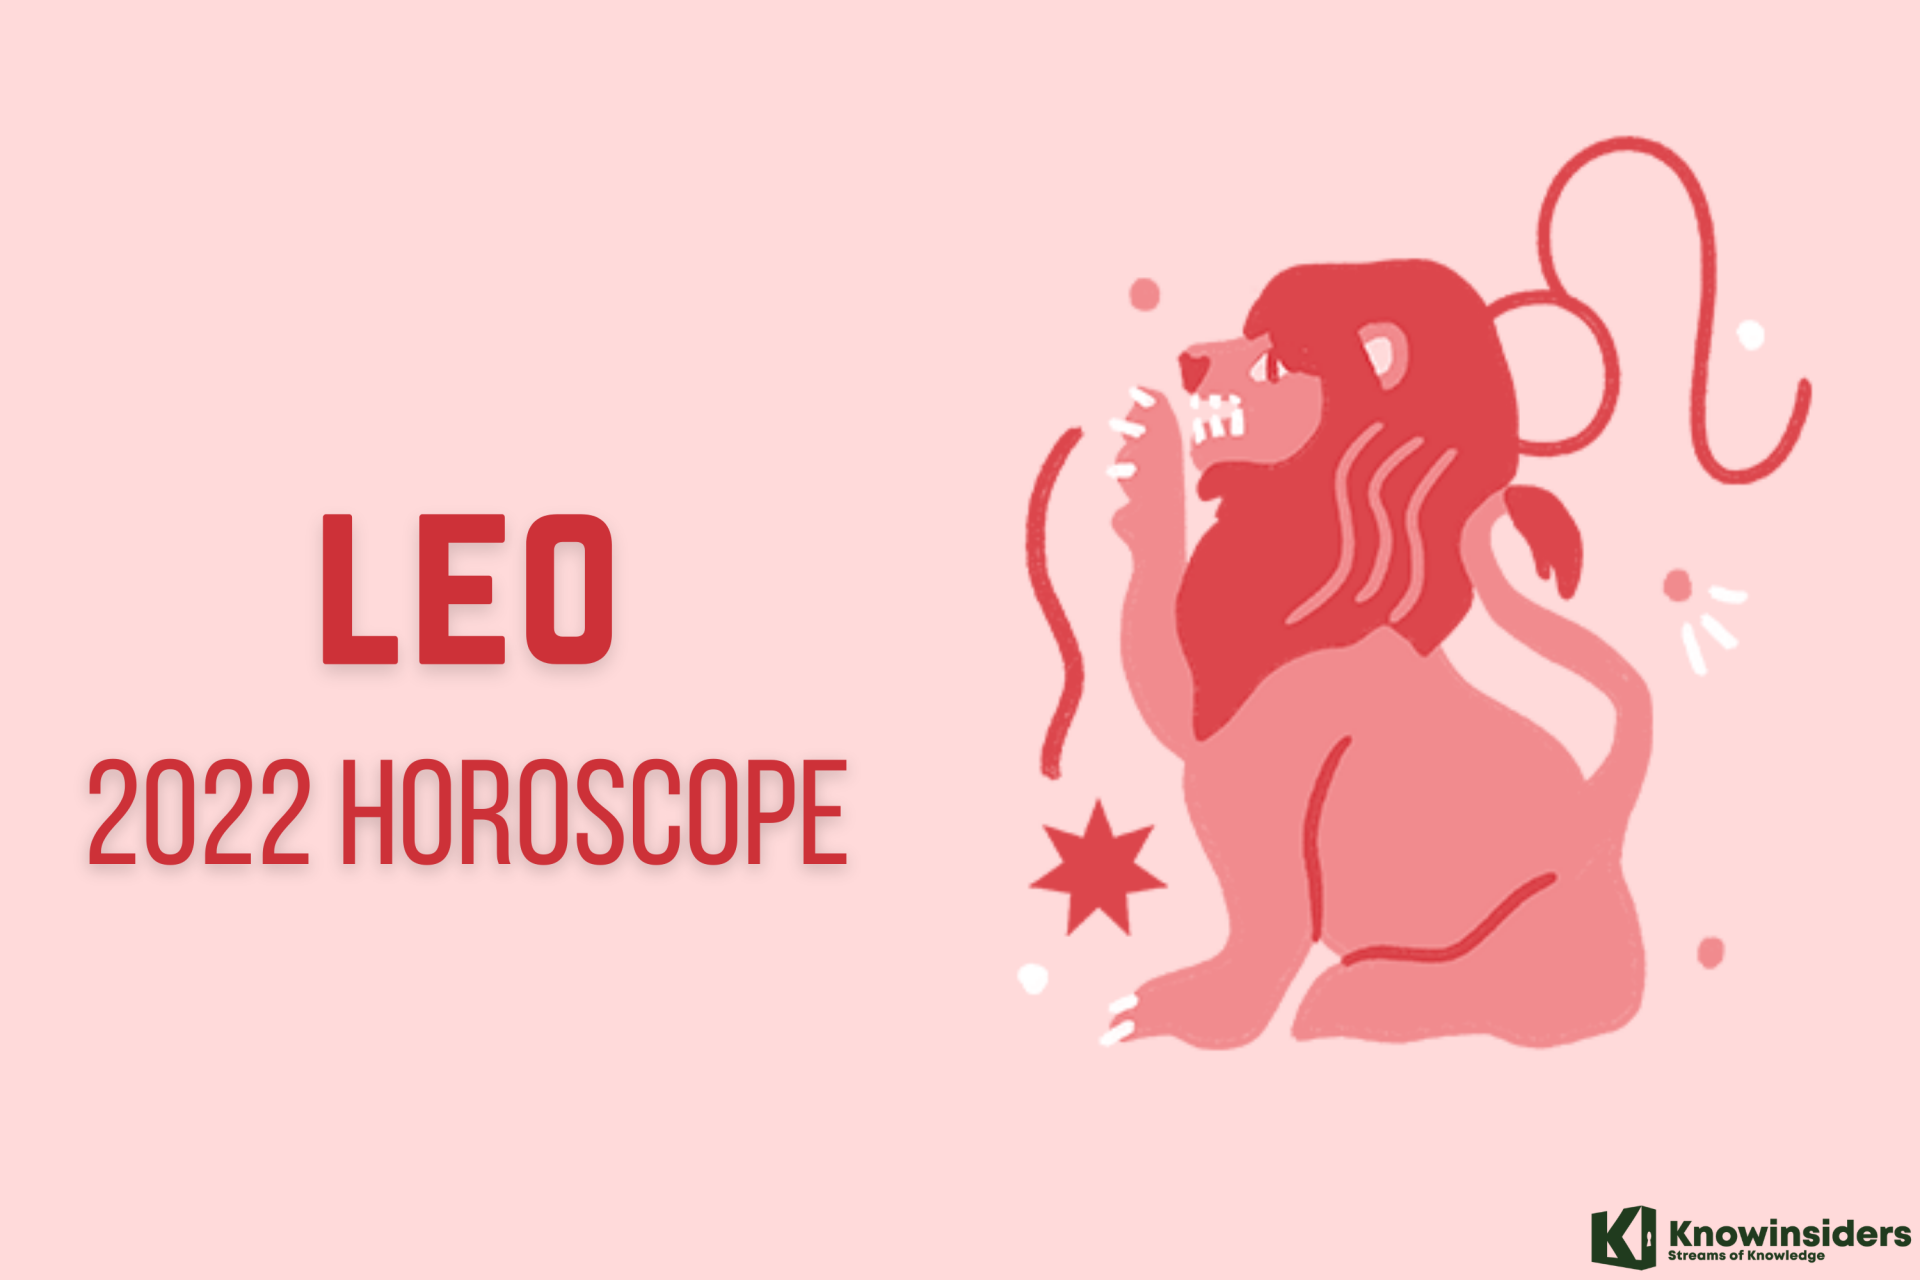 LEO March 2022 Horoscope: Monthly Prediction for Love, Career, Money and Health